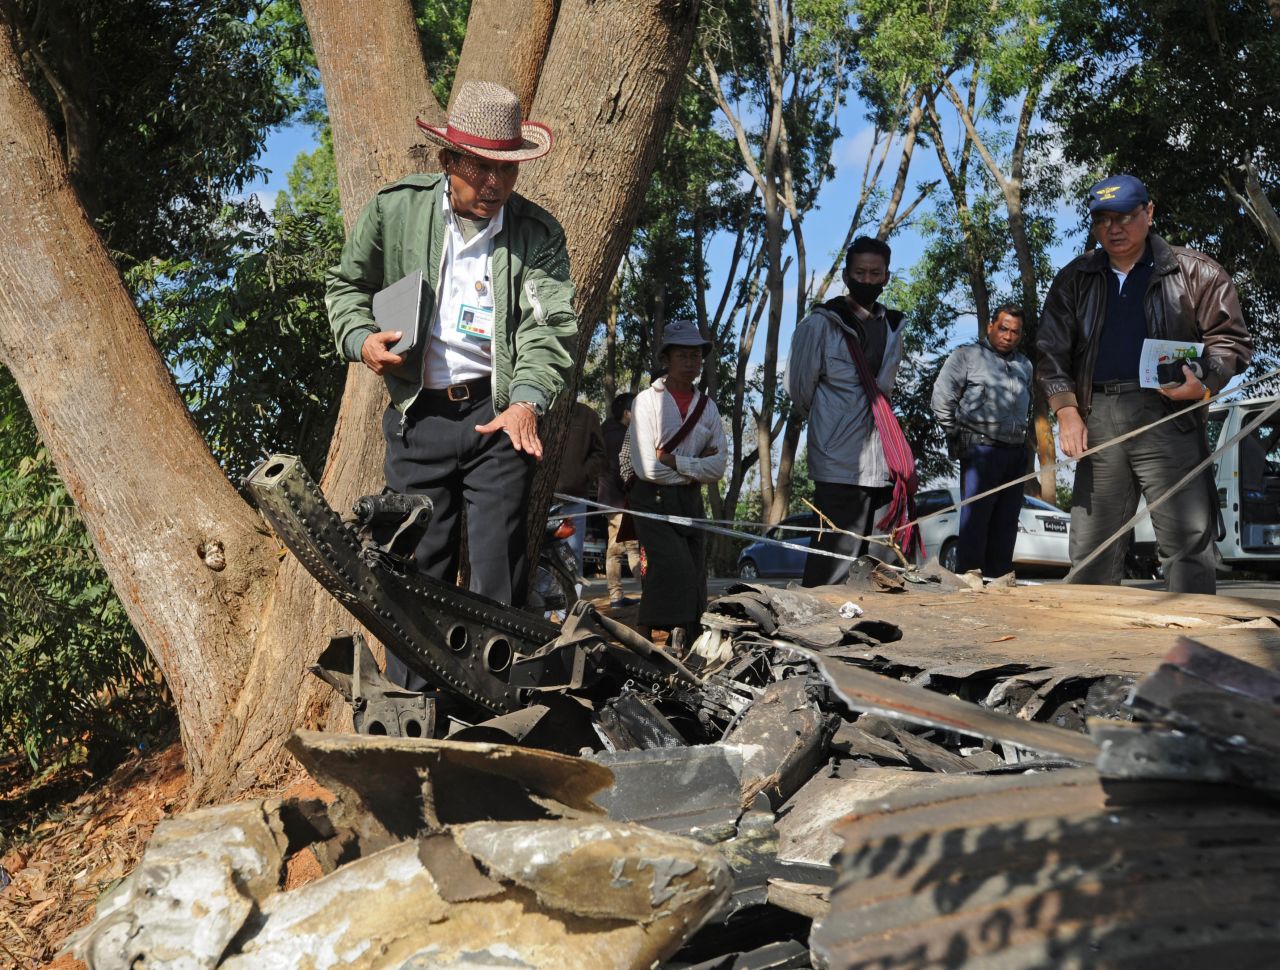 An officer from Myanmar's Department of Civil Aviation inspects the remains of the plane on December 26. An Air Bagan representative said the airline was investigating the crash.